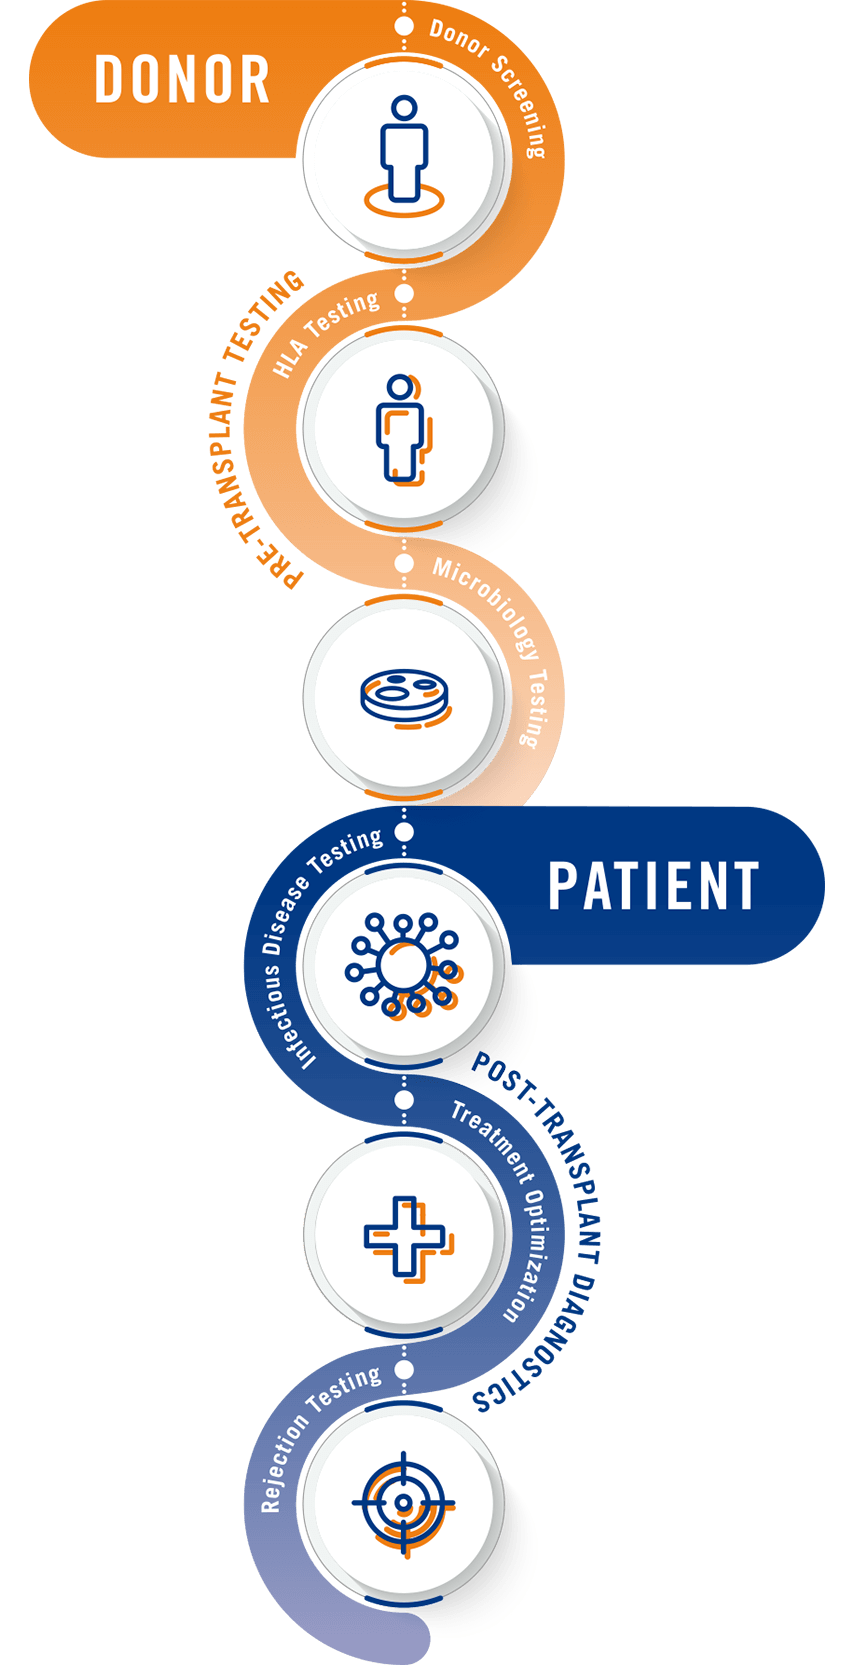 A snaking orange and blue infographic depicts the breadth of services spanning the full transplant journey that Eurofins Transplant Diagnostics provides.